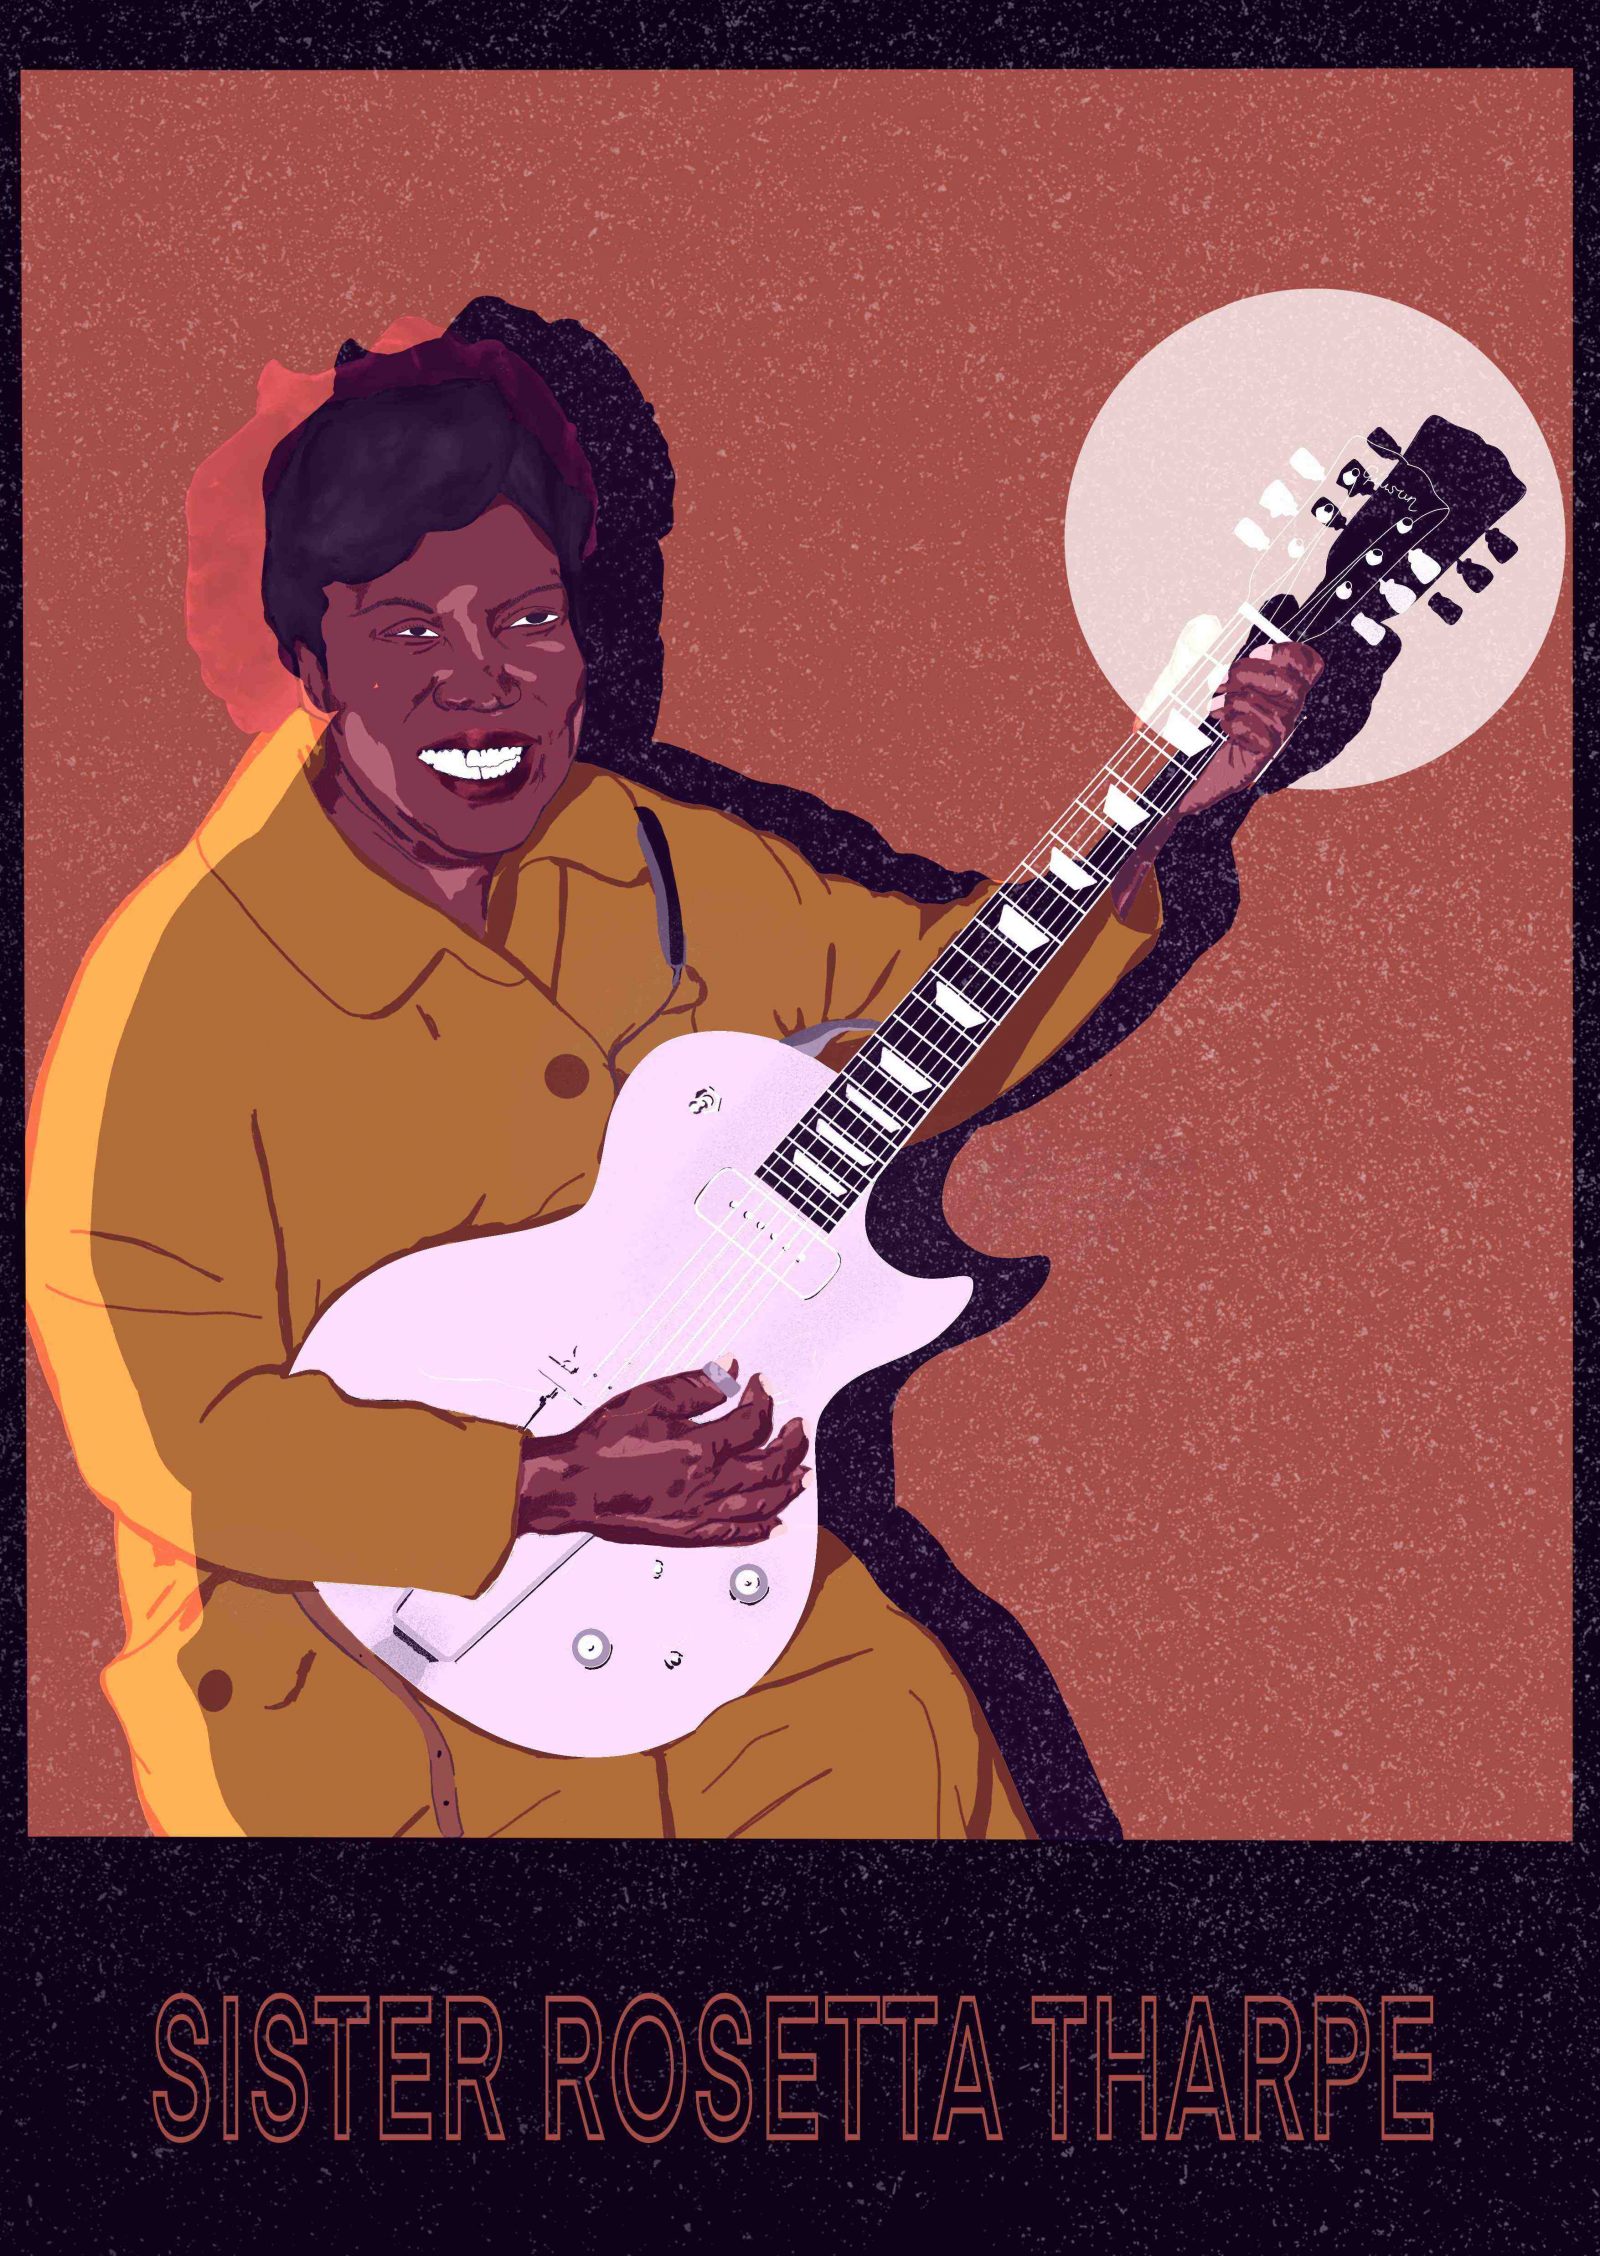 An illustration of Sister Rosetta Tharpe wearing a long mustard coat and holding a guitar.